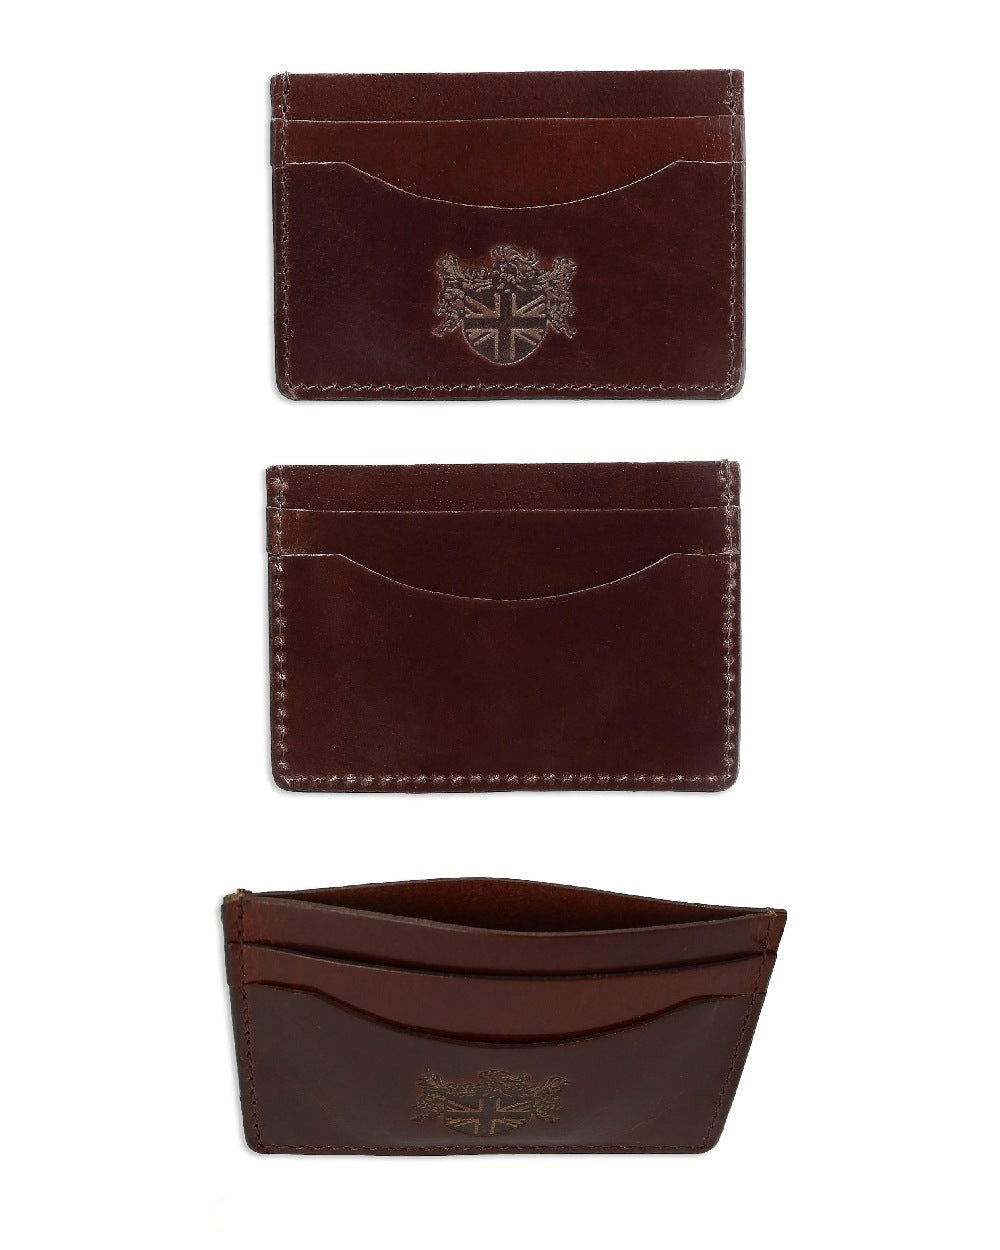 British Bag Co. Glossy Leather Card Holder in Brown 